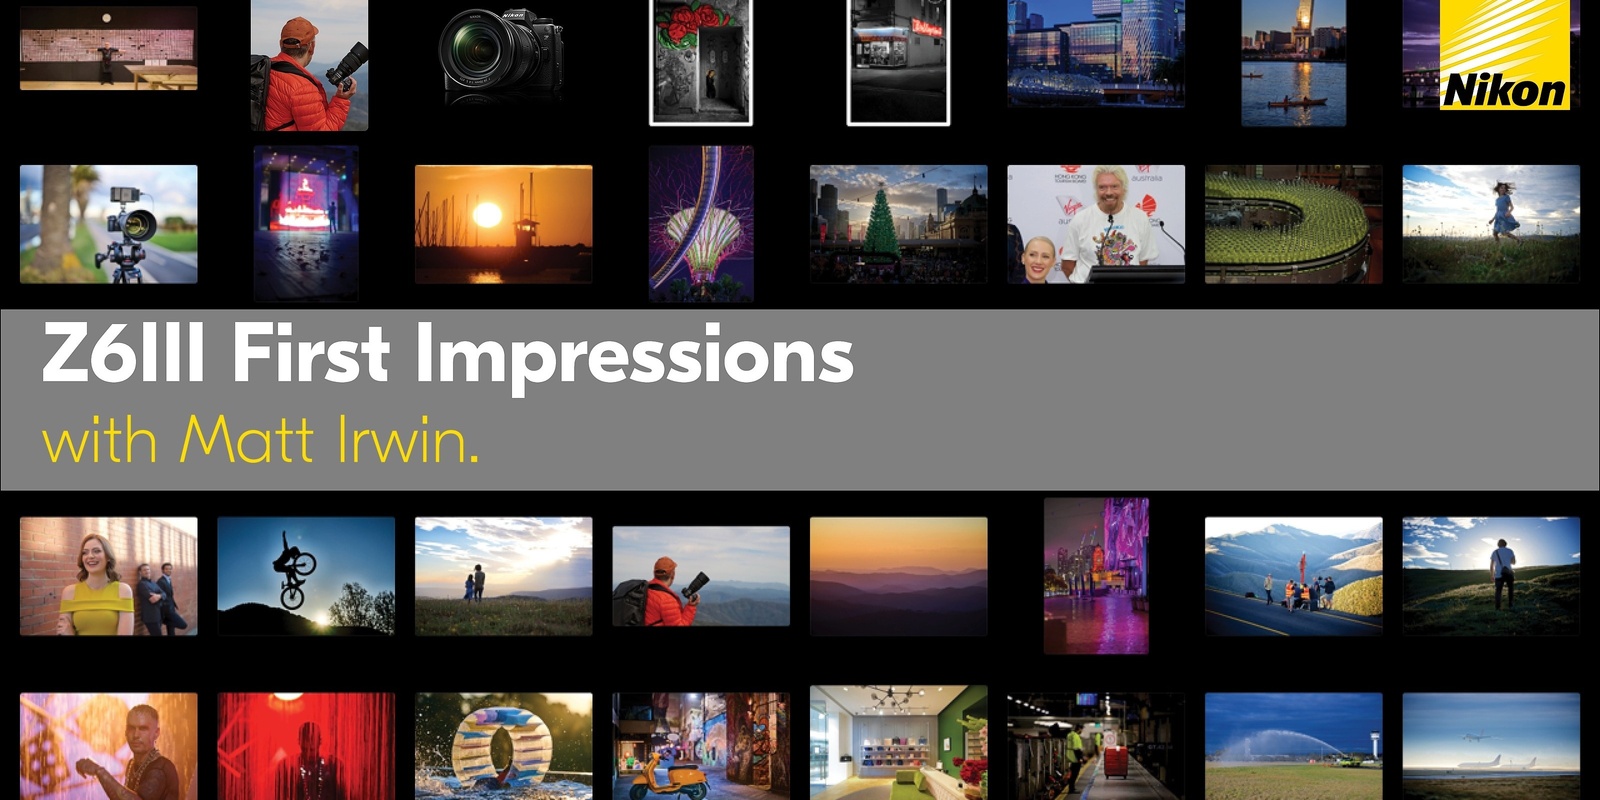 Banner image for Nikon Z6III First Impressions - brought to you by Matt Irwin